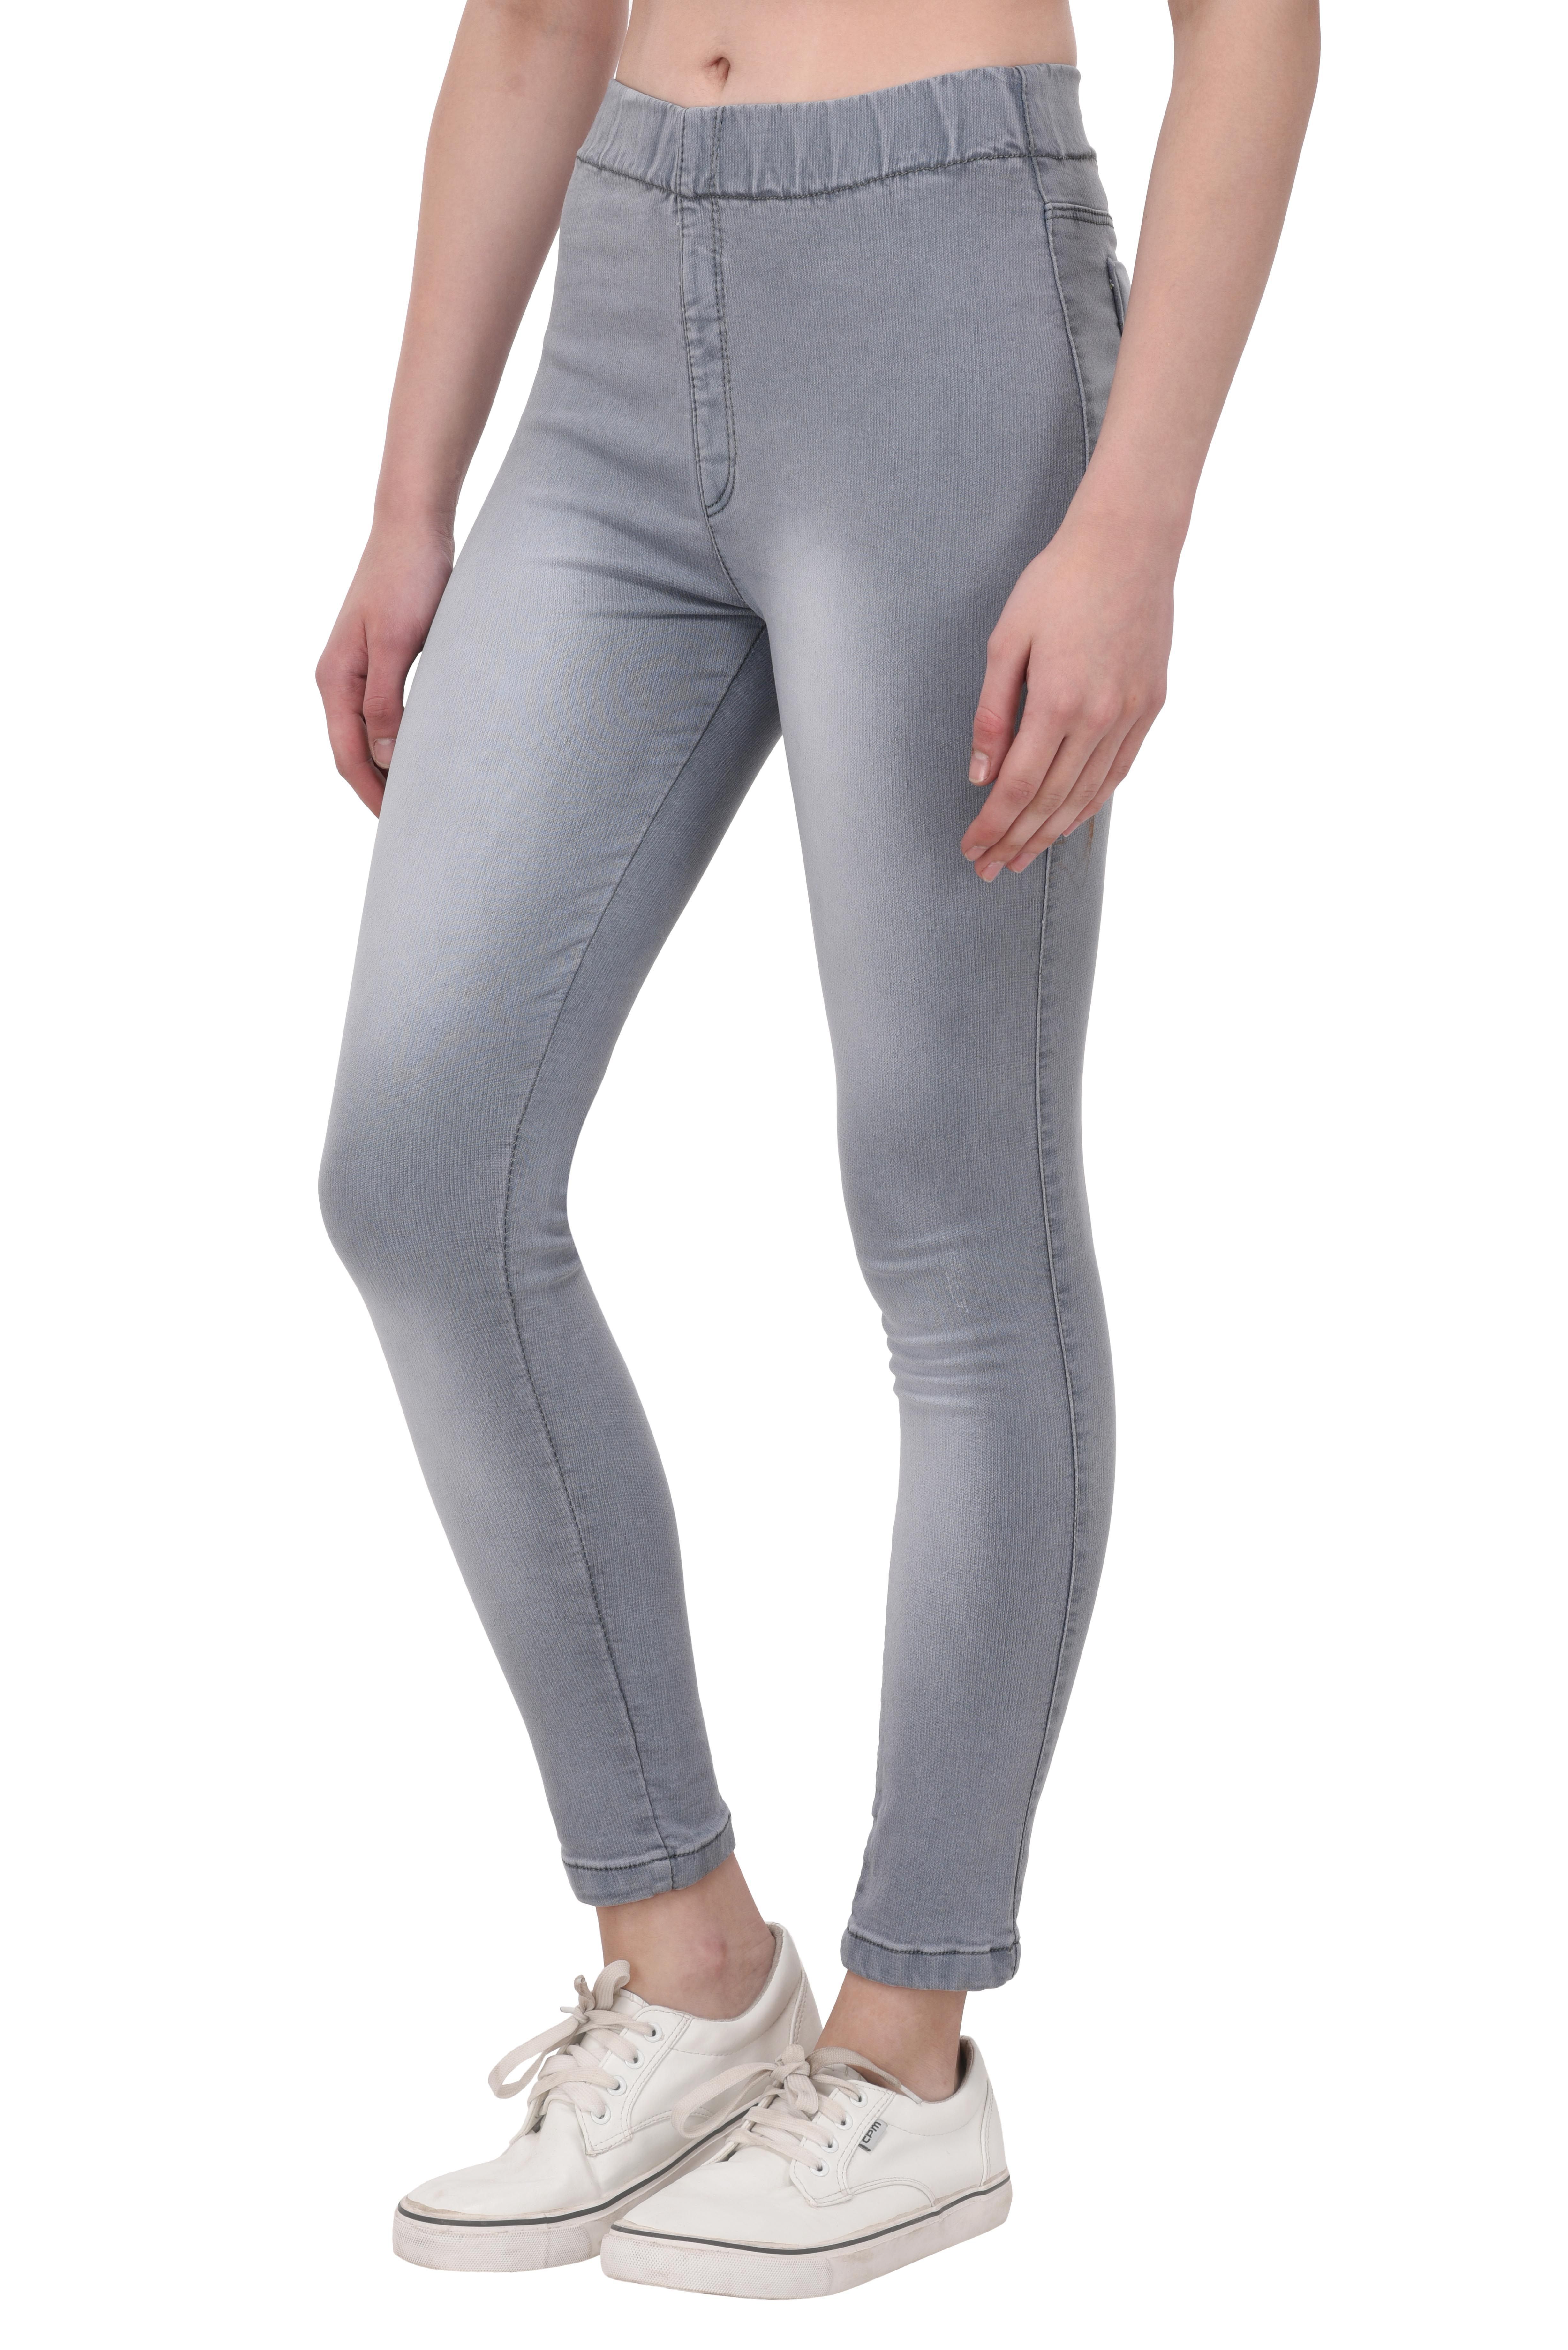 Buy Thinline Denim Jeggings Grey Online at Best Prices in India